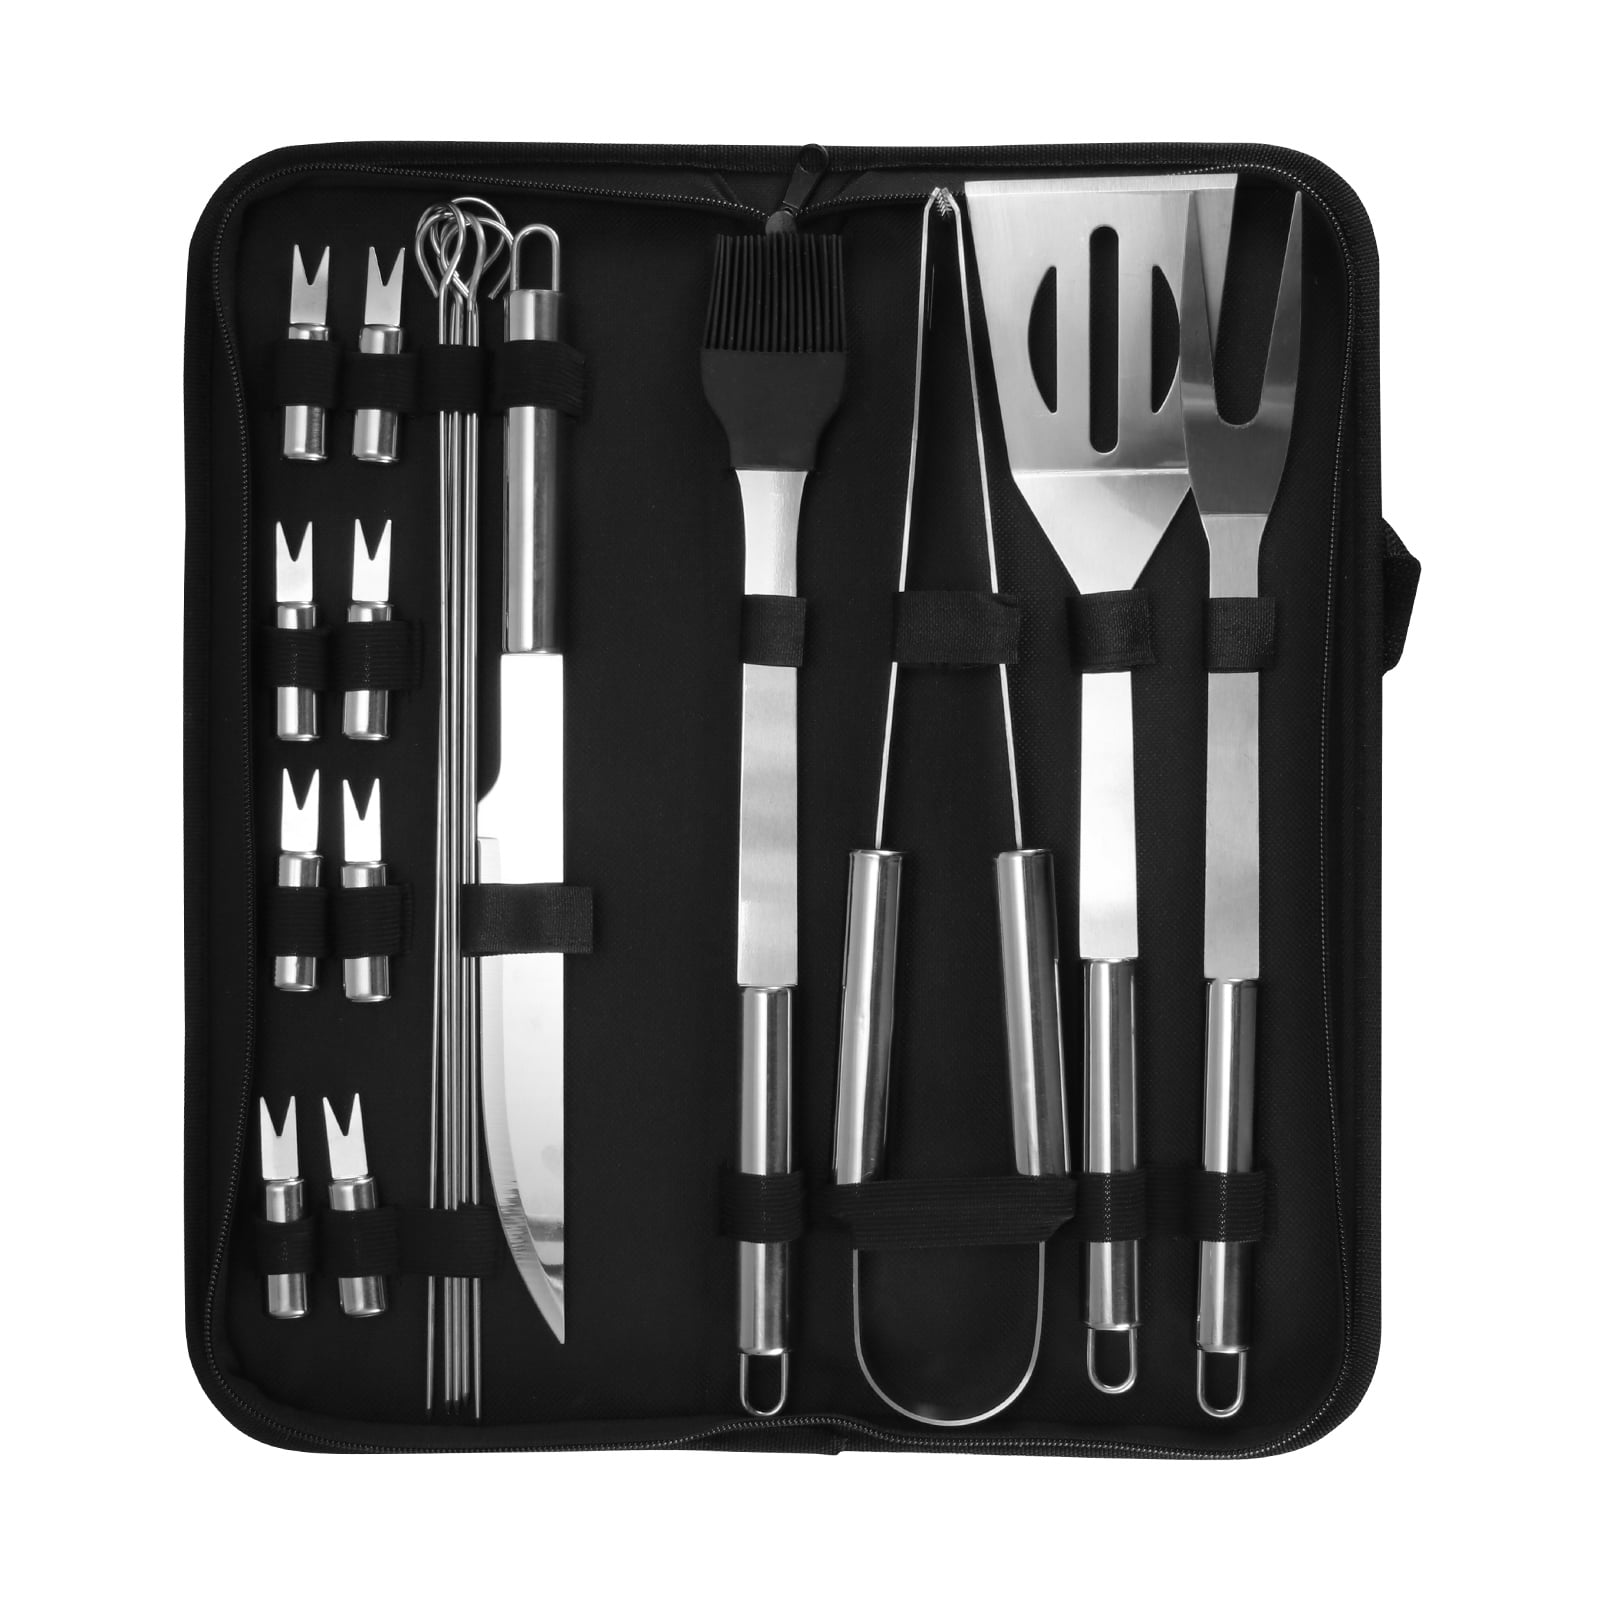 Stainless Steel BBQ Grill Tools Set Kit Utensils 18 Accessories Outdoor Grilling 